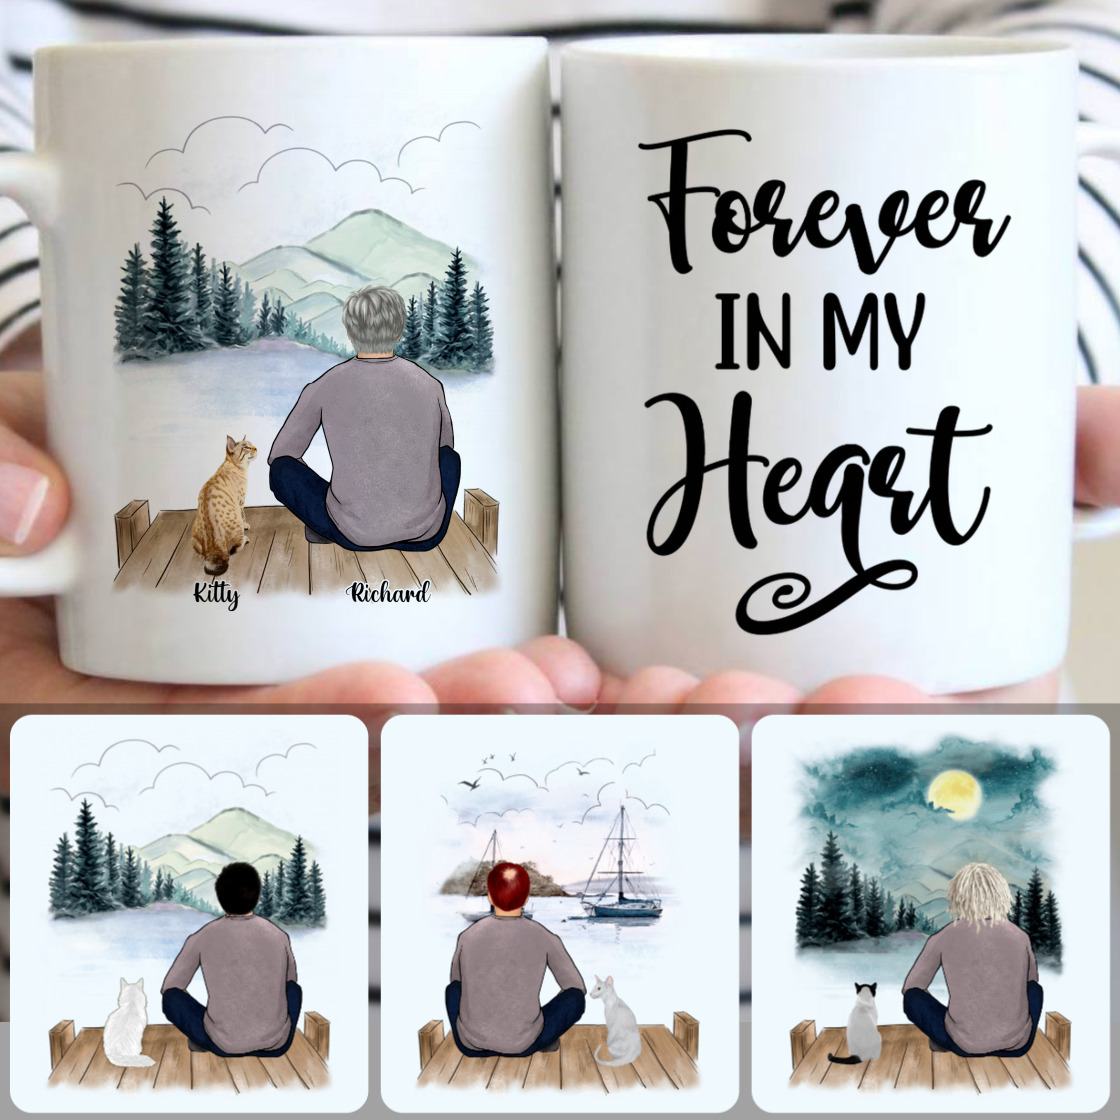 Personalized Mug, Unique Gifts For Him Husband Boyfriend, Man & Cat Customized Coffee Mug With Names